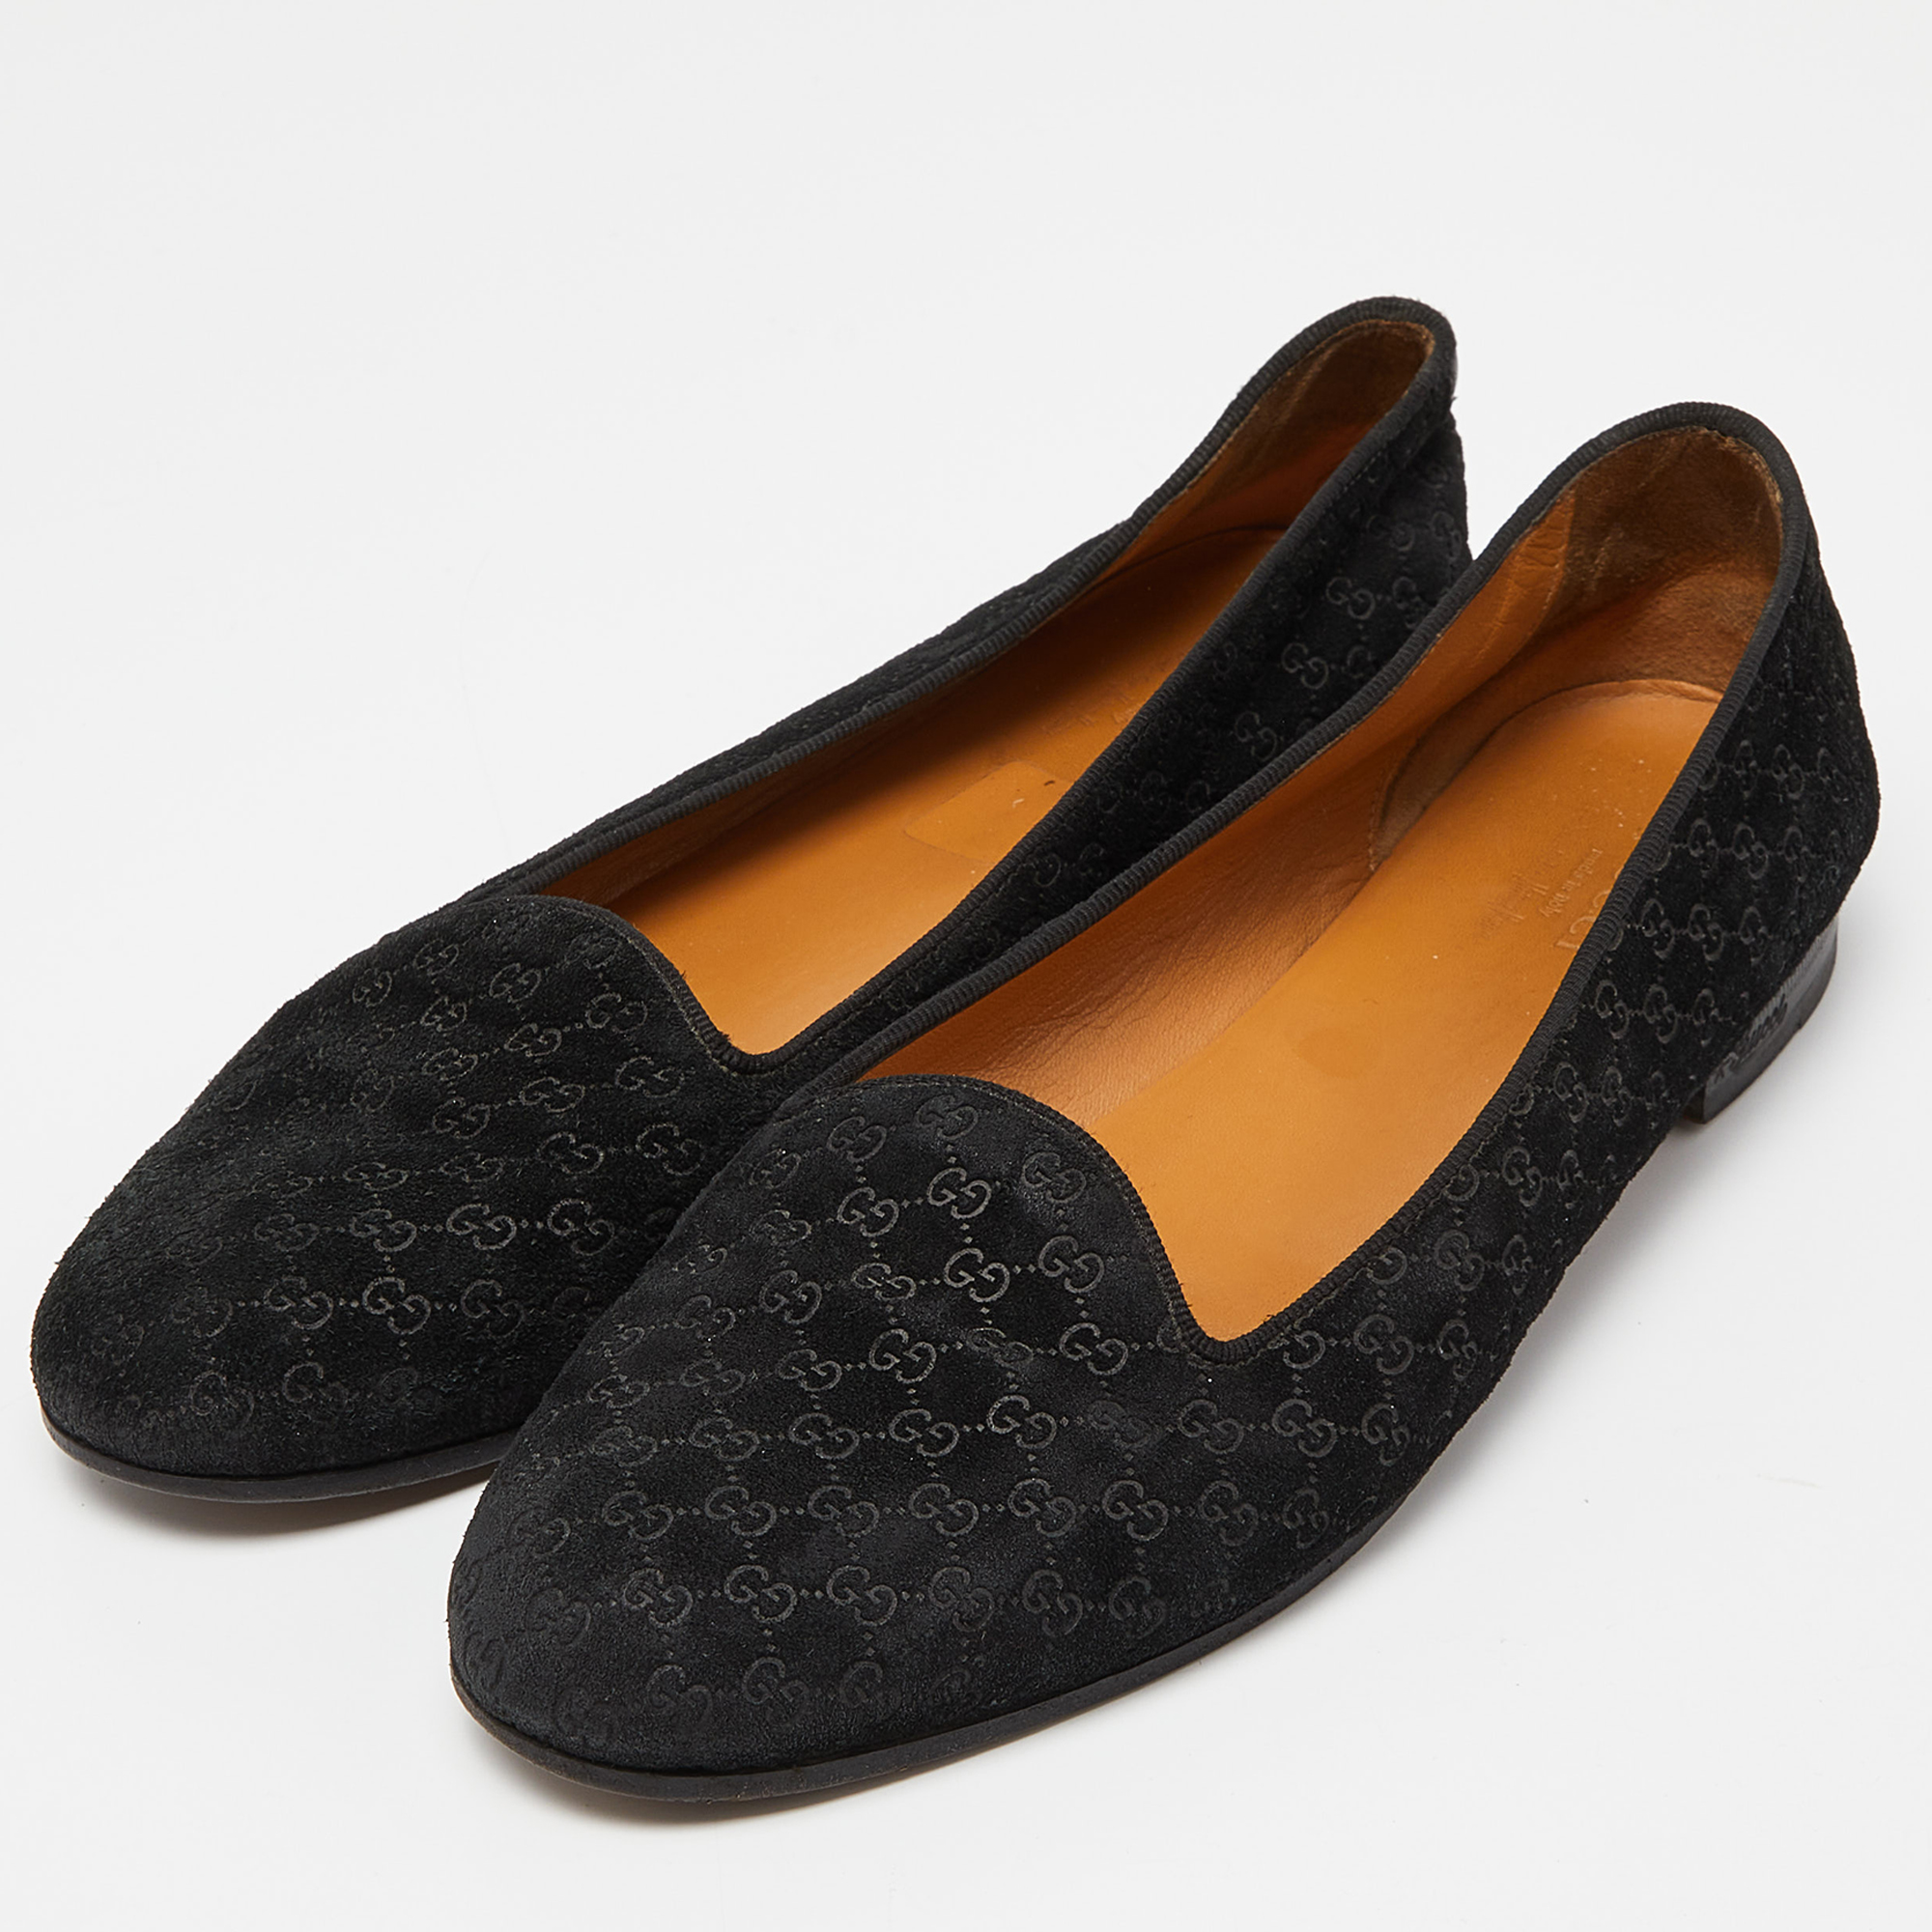 

Gucci Black Microguccissima Suede Smoking Slippers Size